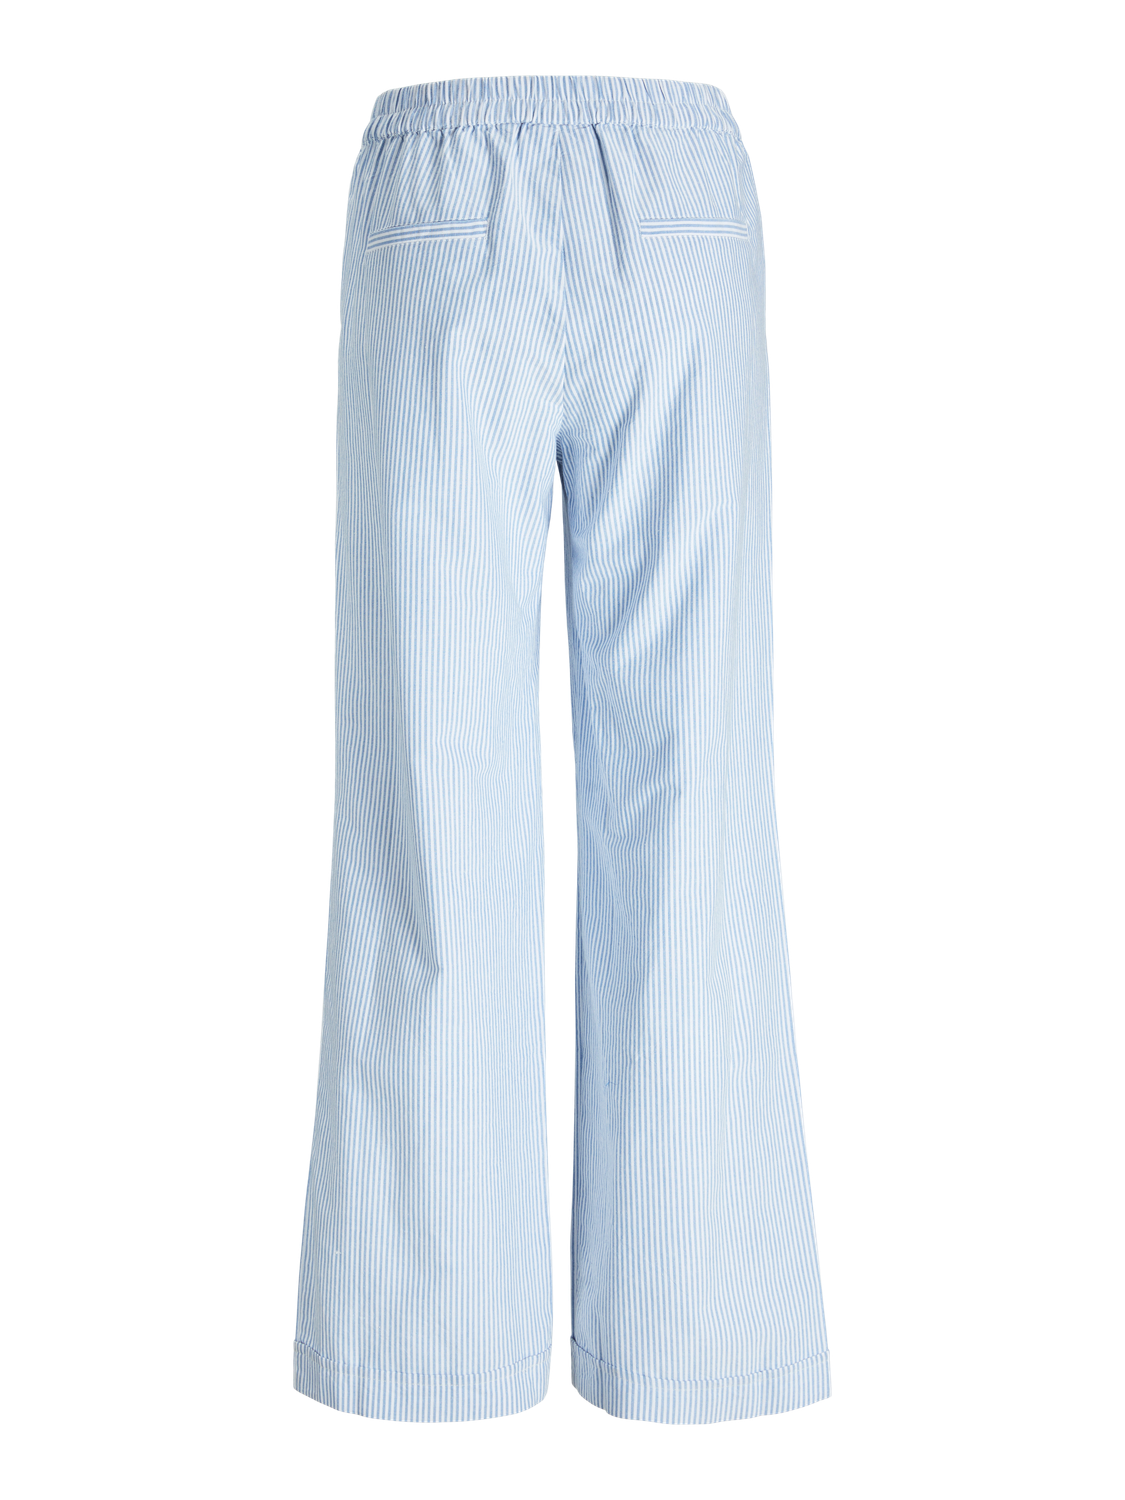 JJXX Παντελόνι Relaxed Fit Παντελόνι -Silver Lake Blue - 12254570